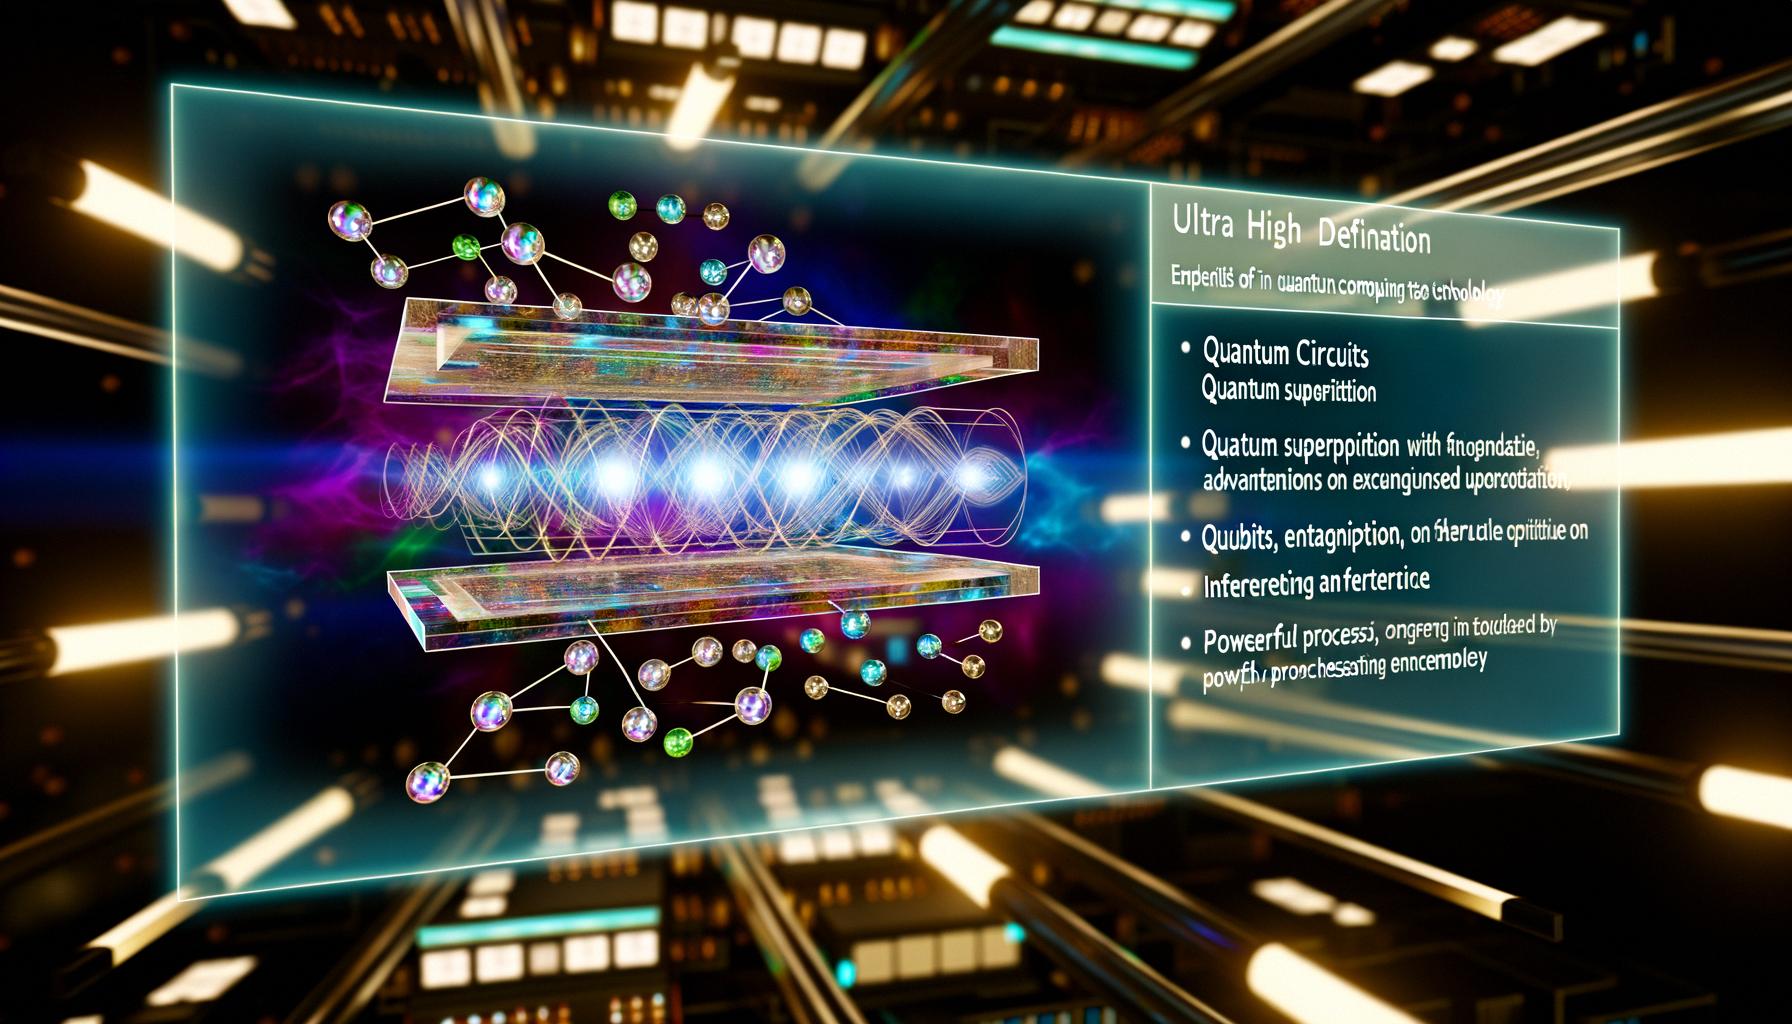 Significant advancements in quantum computing reported by Intel.